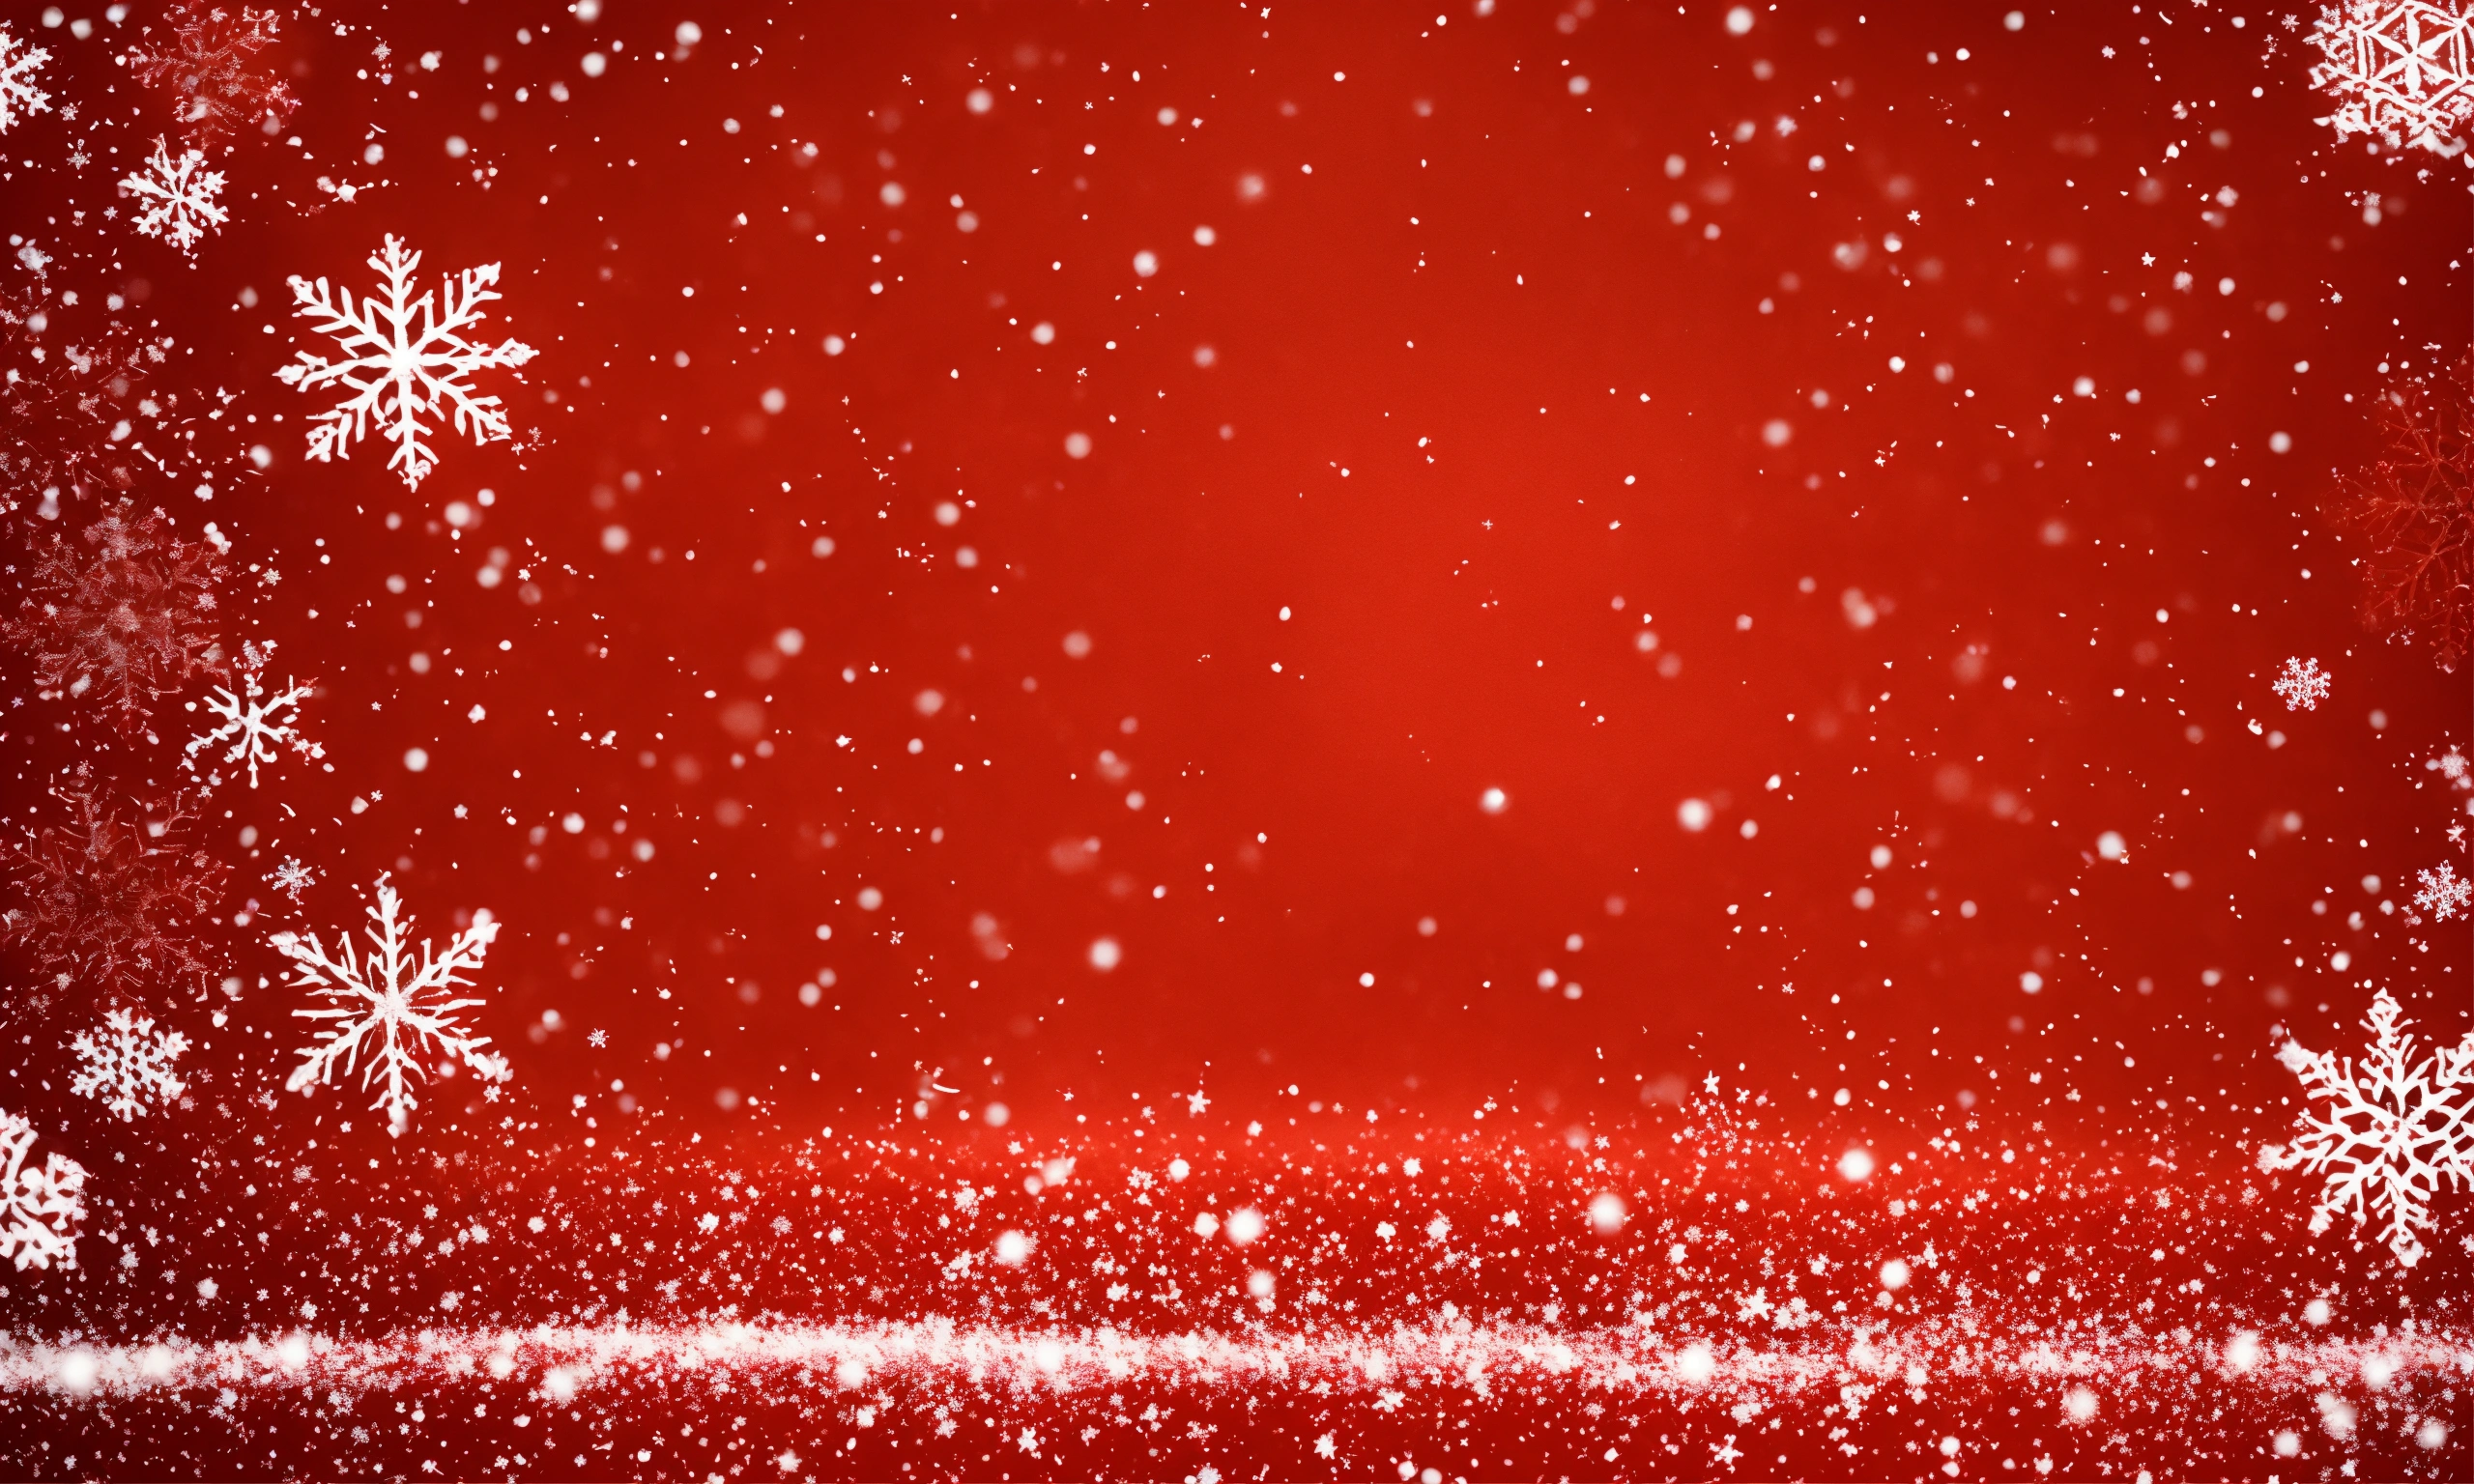 Lexica - A red background with snowflakes